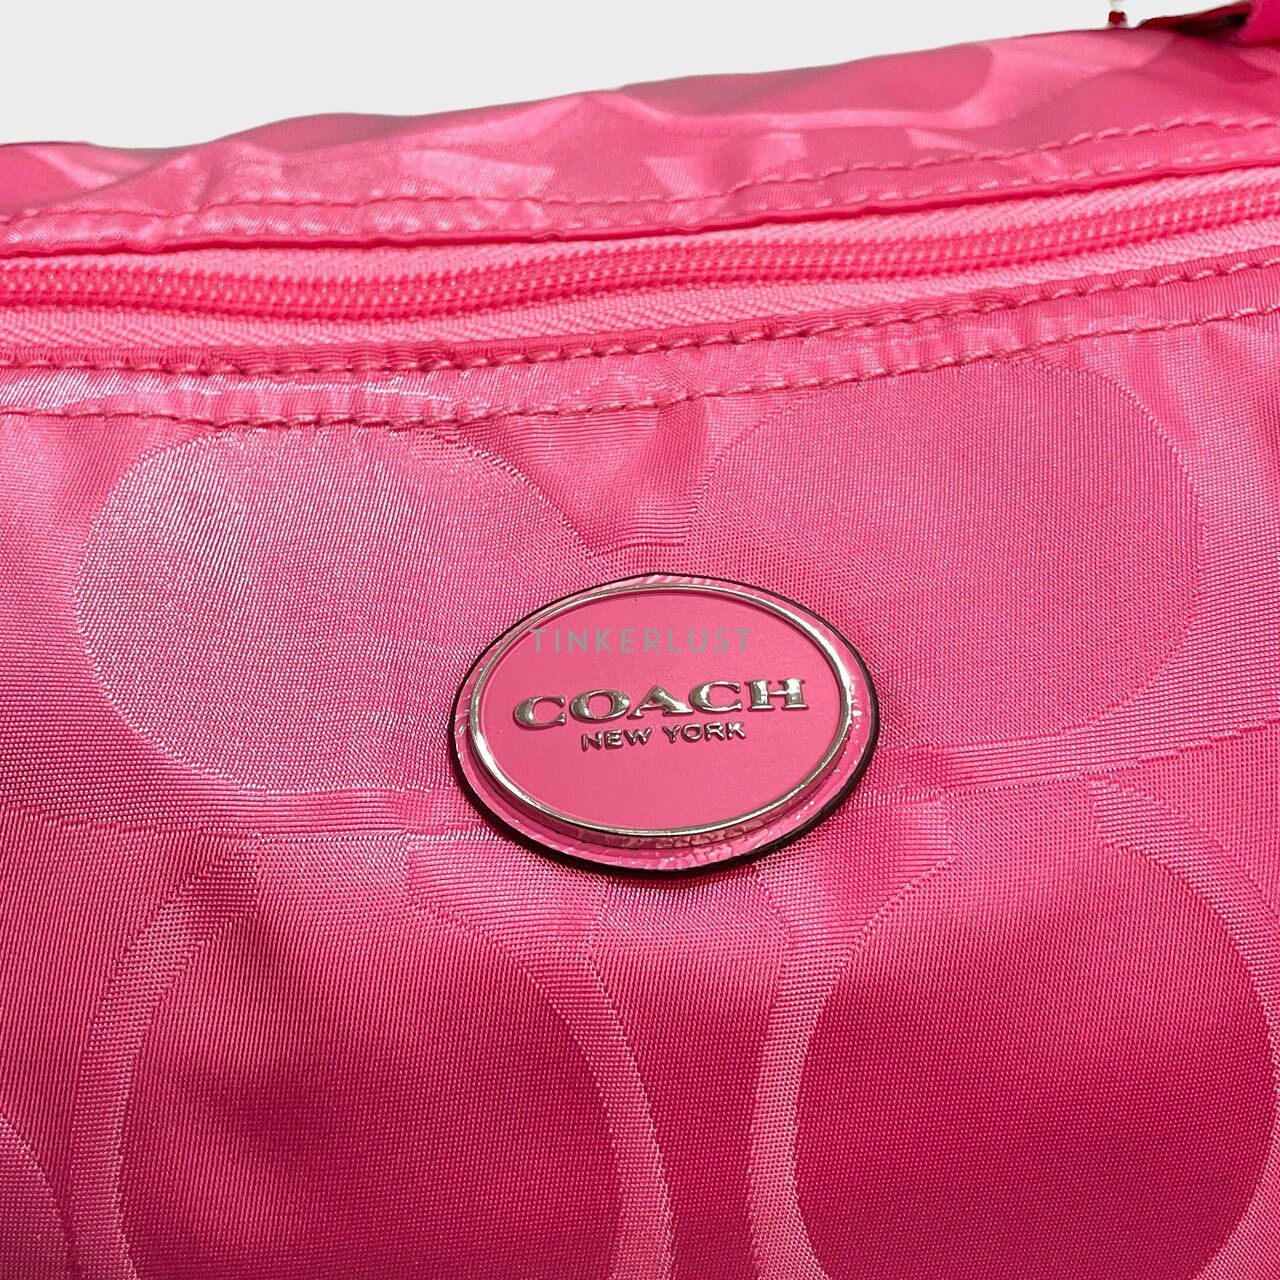 Coach Weekender Pink Pouch & Tote Bag